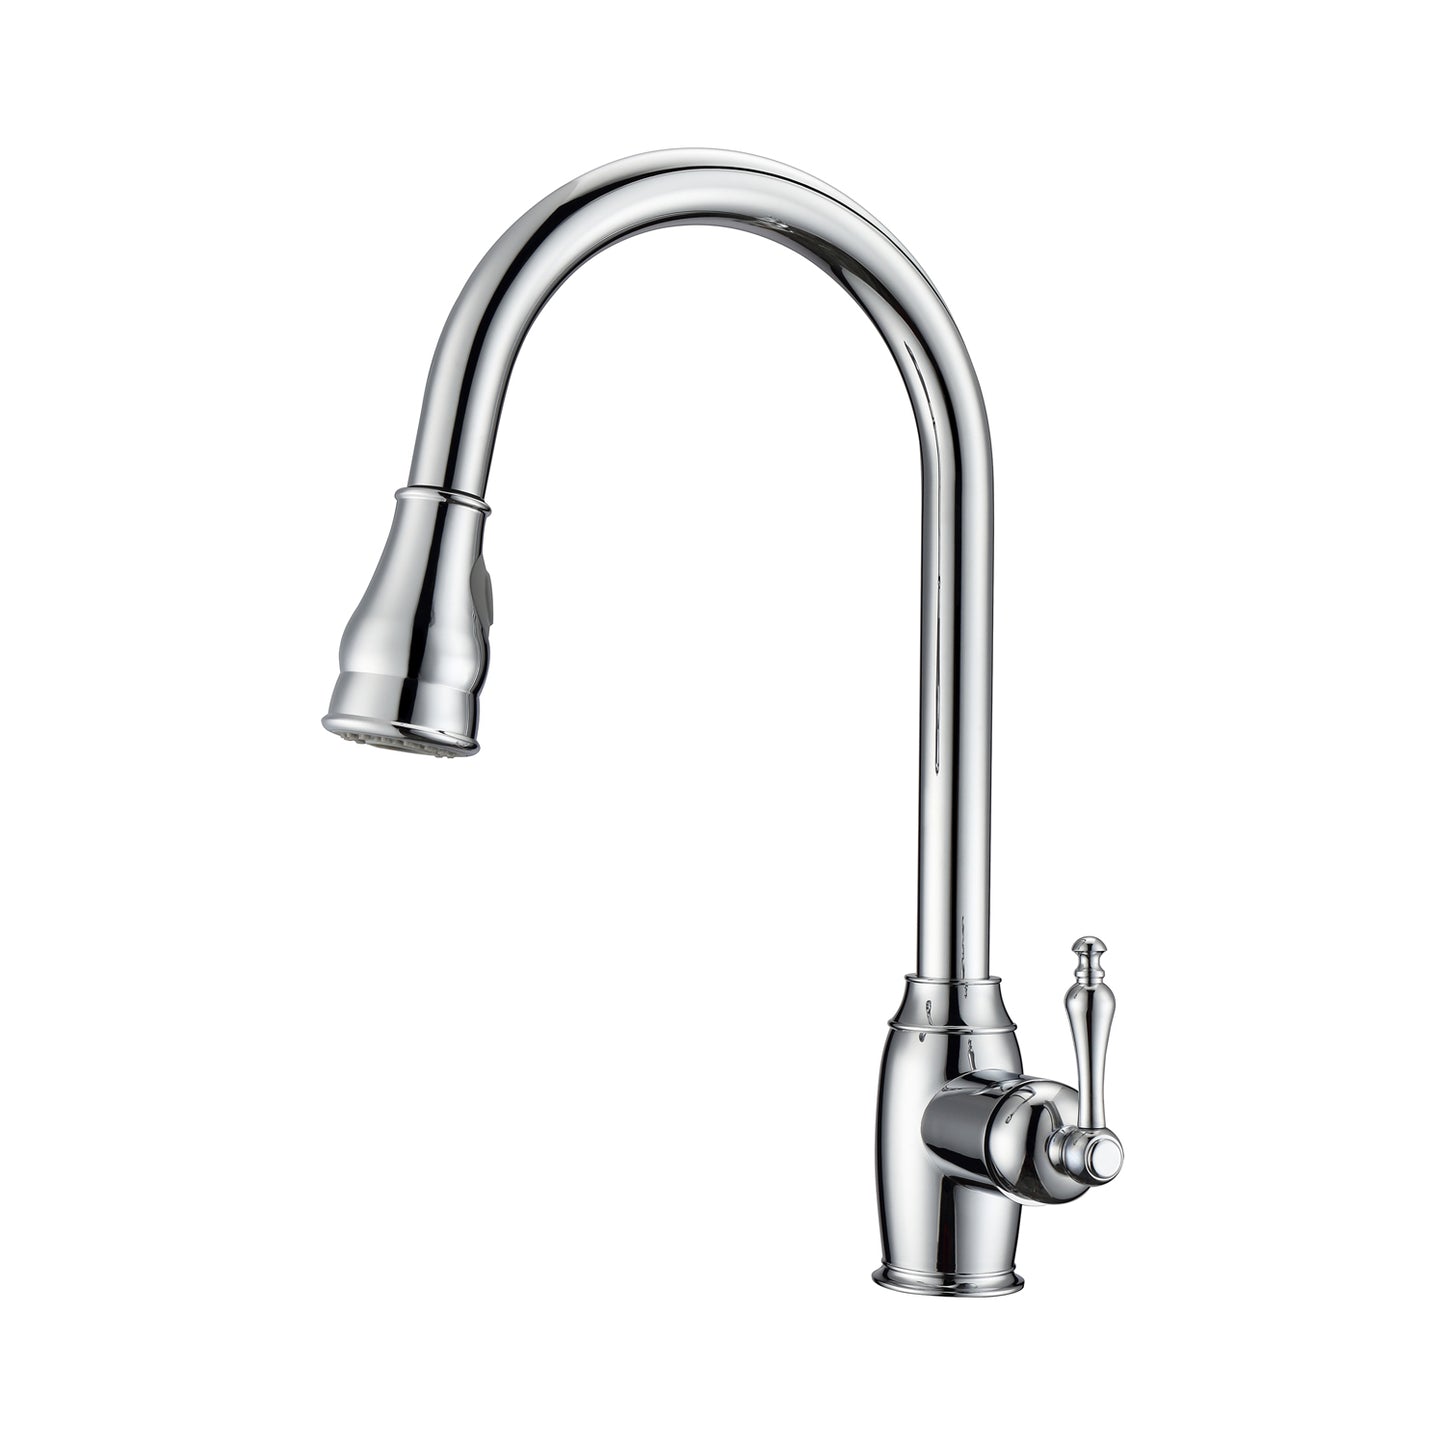 Bay 1 Kitchen Faucet, Pull-Out Sprayer, Single Lever Handle, Chrome